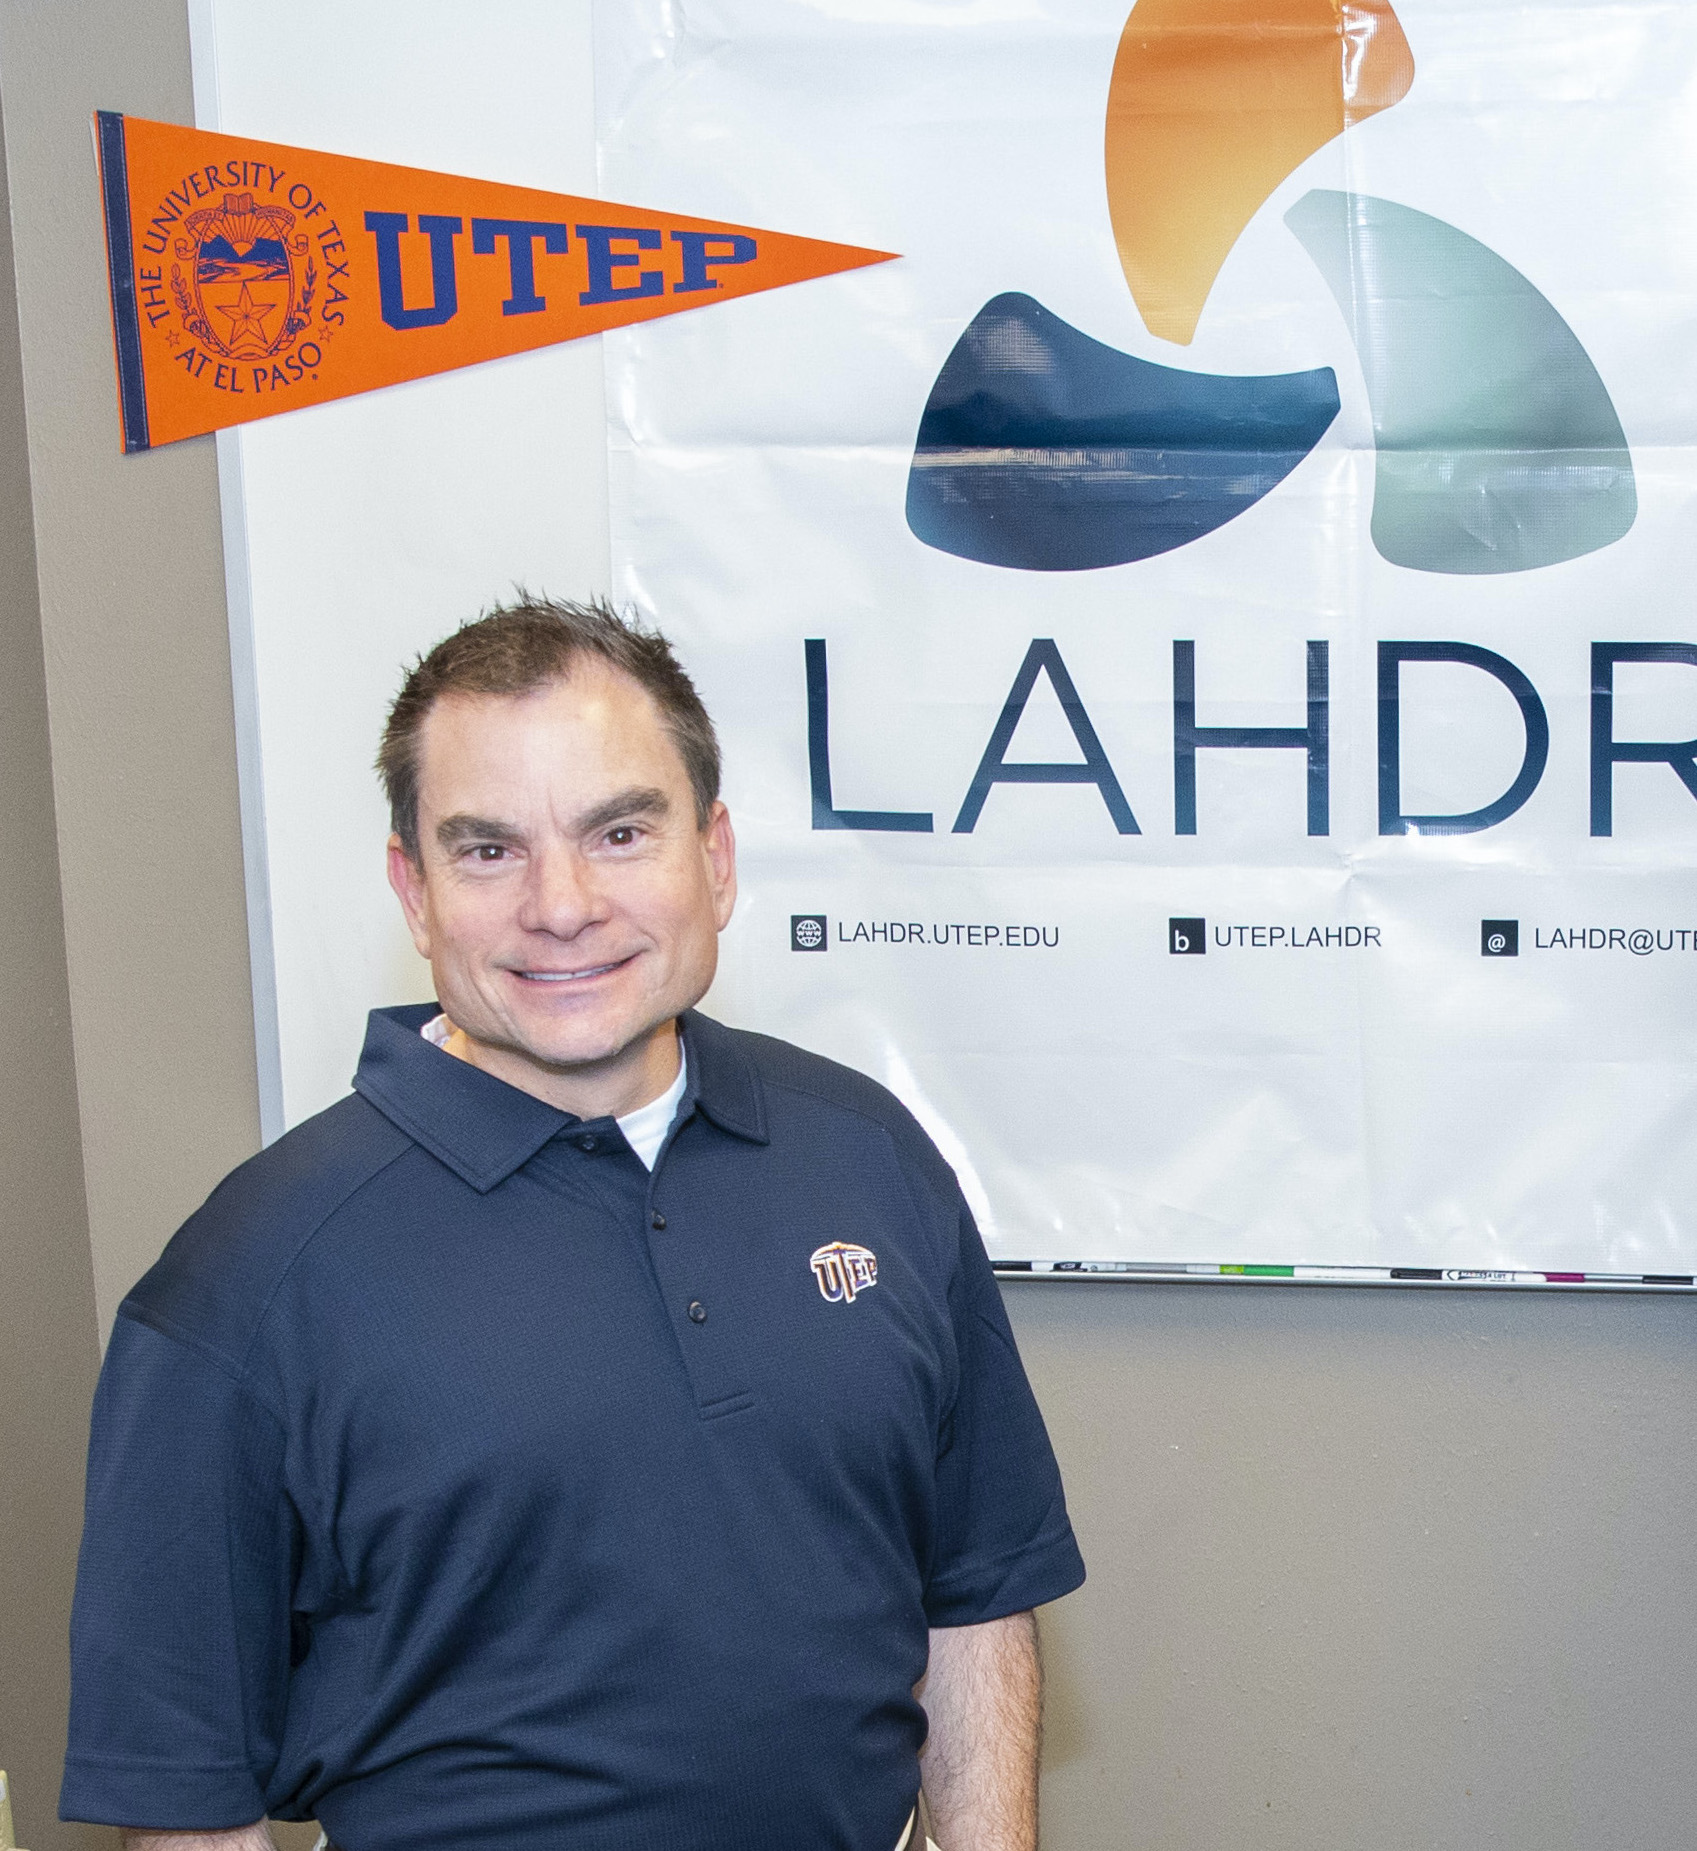 A cohort of faculty, staff and students who are part of UTEP’s Latino Alcohol and Health Disparities Research (LAHDR) and Training Center plan to launch a new self-funded research effort, called CAMBIOS, in April 2020 that will focus on successful changes among heavy drinkers that may include abstinence. They are led by Craig Field, Ph.D., professor of psychology. Photo: Ivan Pierre Aguirre / UTEP Communications 